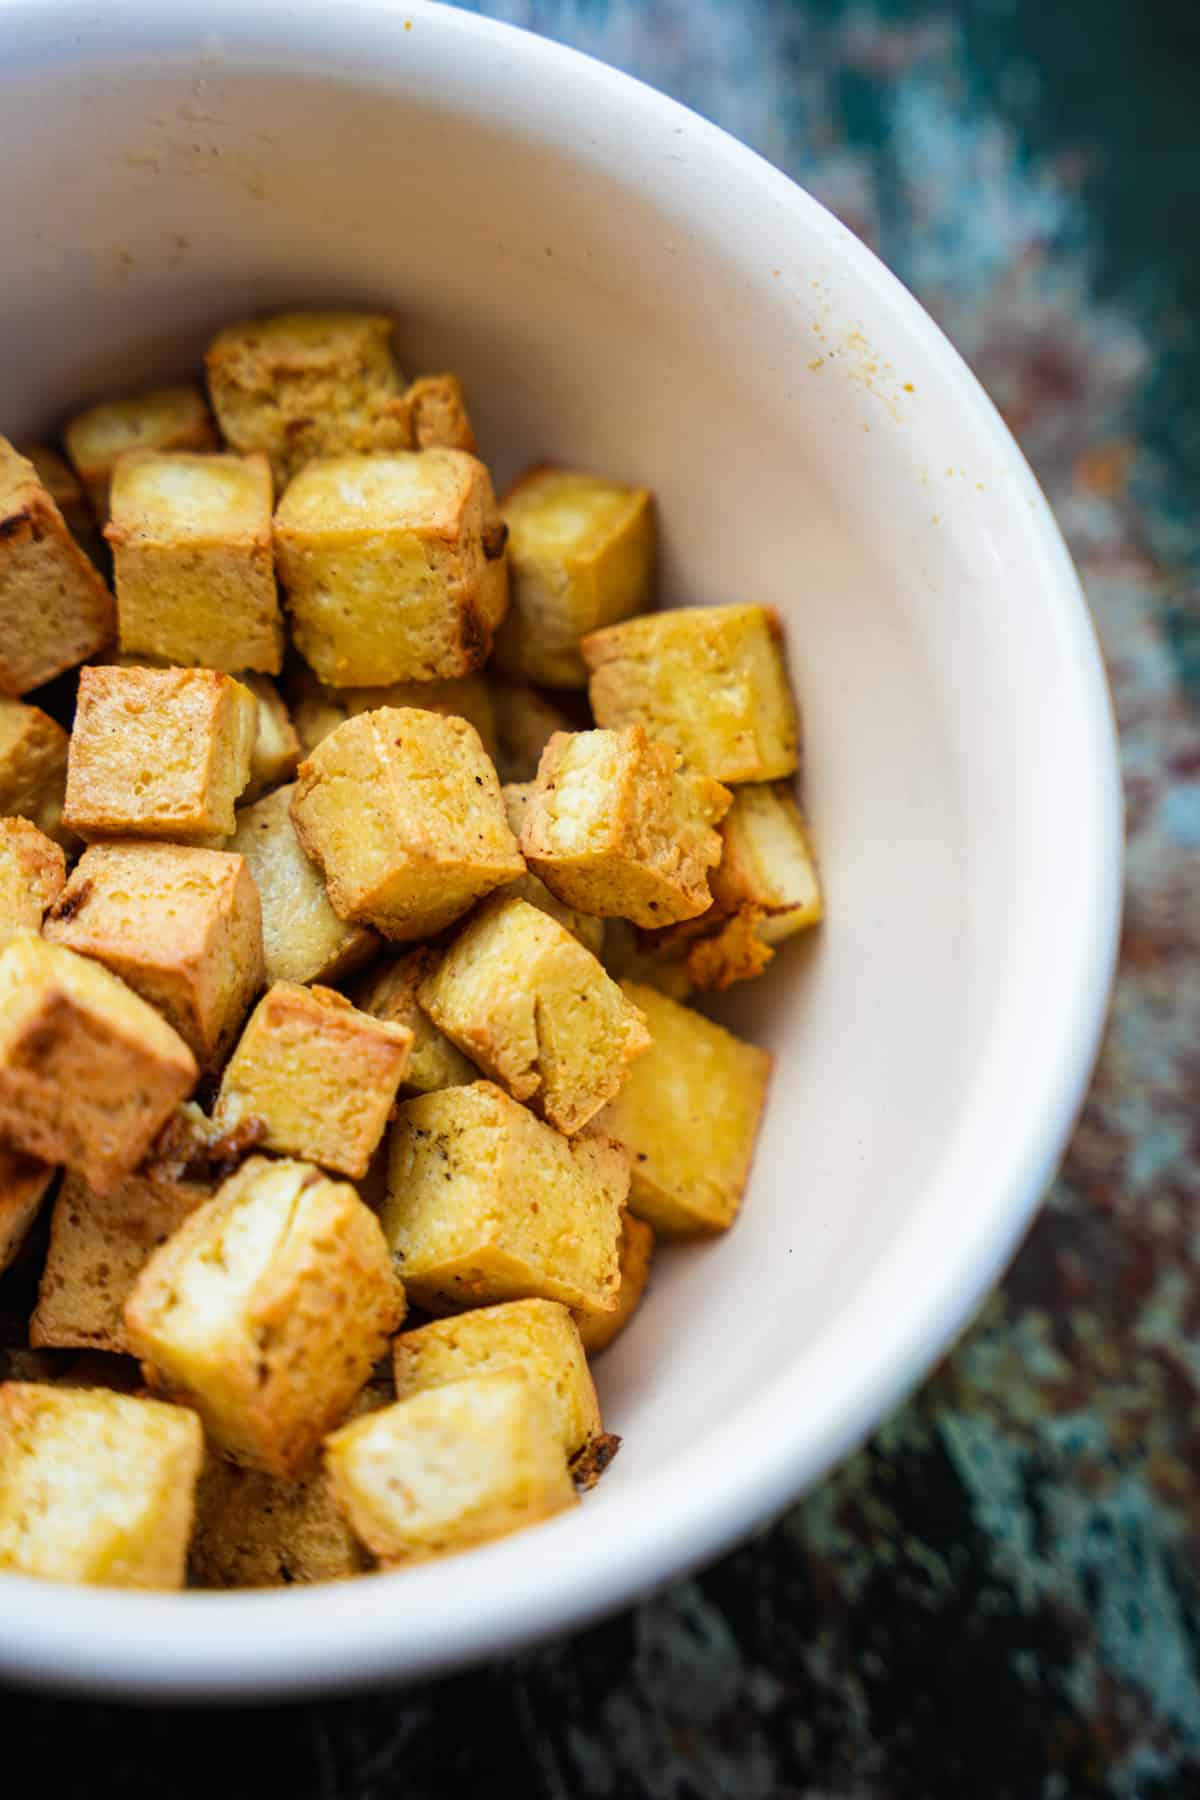 Tofu placed in a bowl aside while the rest of the dish cooks.